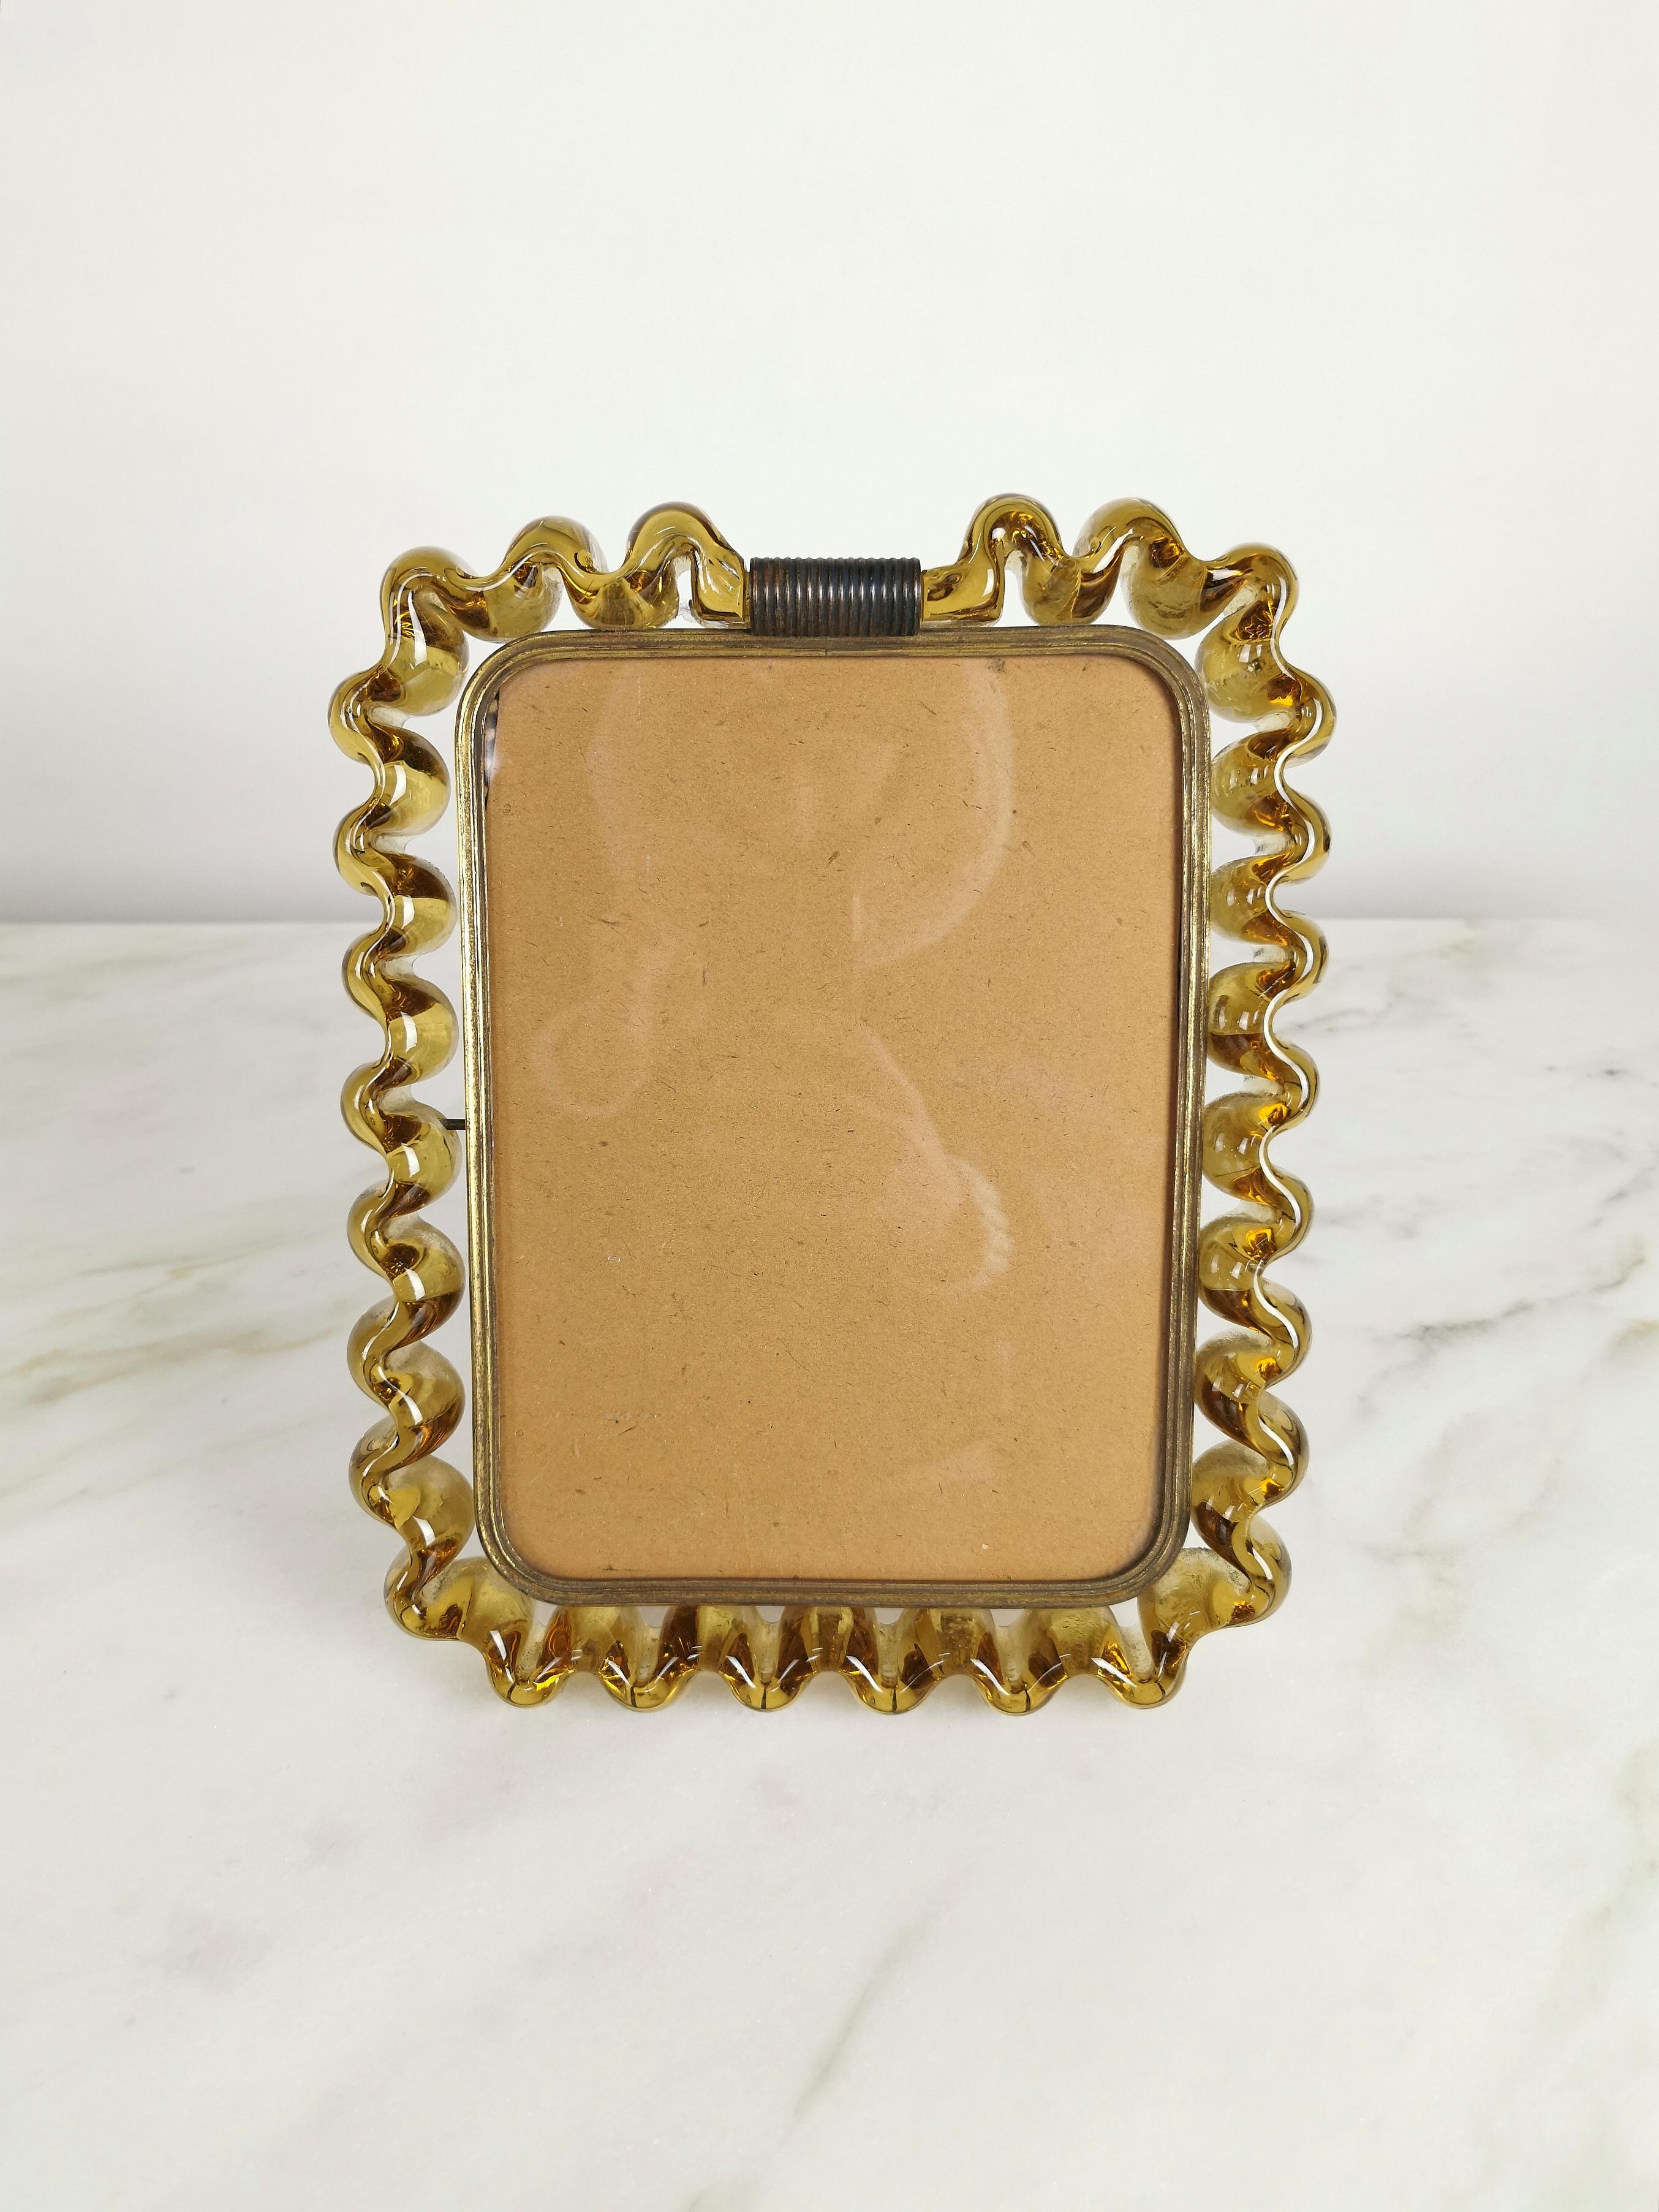 Rare and elegant Venini photo frame of considerable size, produced in Italy in the 1940s.
The photo frame was made in Murano glass with a ribbon in the shade of amber with structure and accessories in brass.